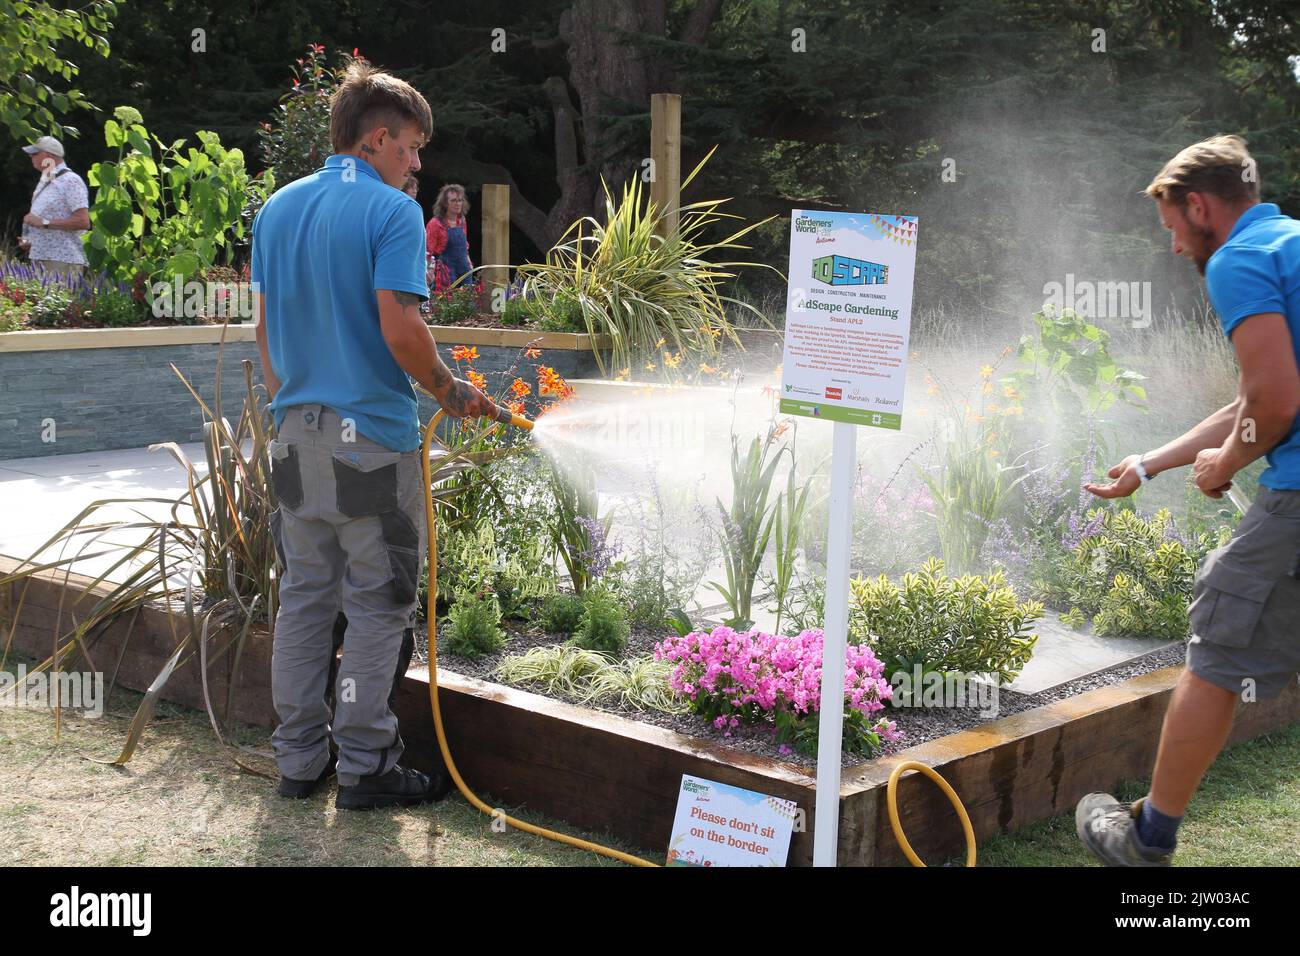 The first ever BBC Gardeners' World Autumn Fair is taking place at Audley End House in Essex. Adscape Gardening, one of the competing teams in the APL Professional Skills competition. Stock Photo